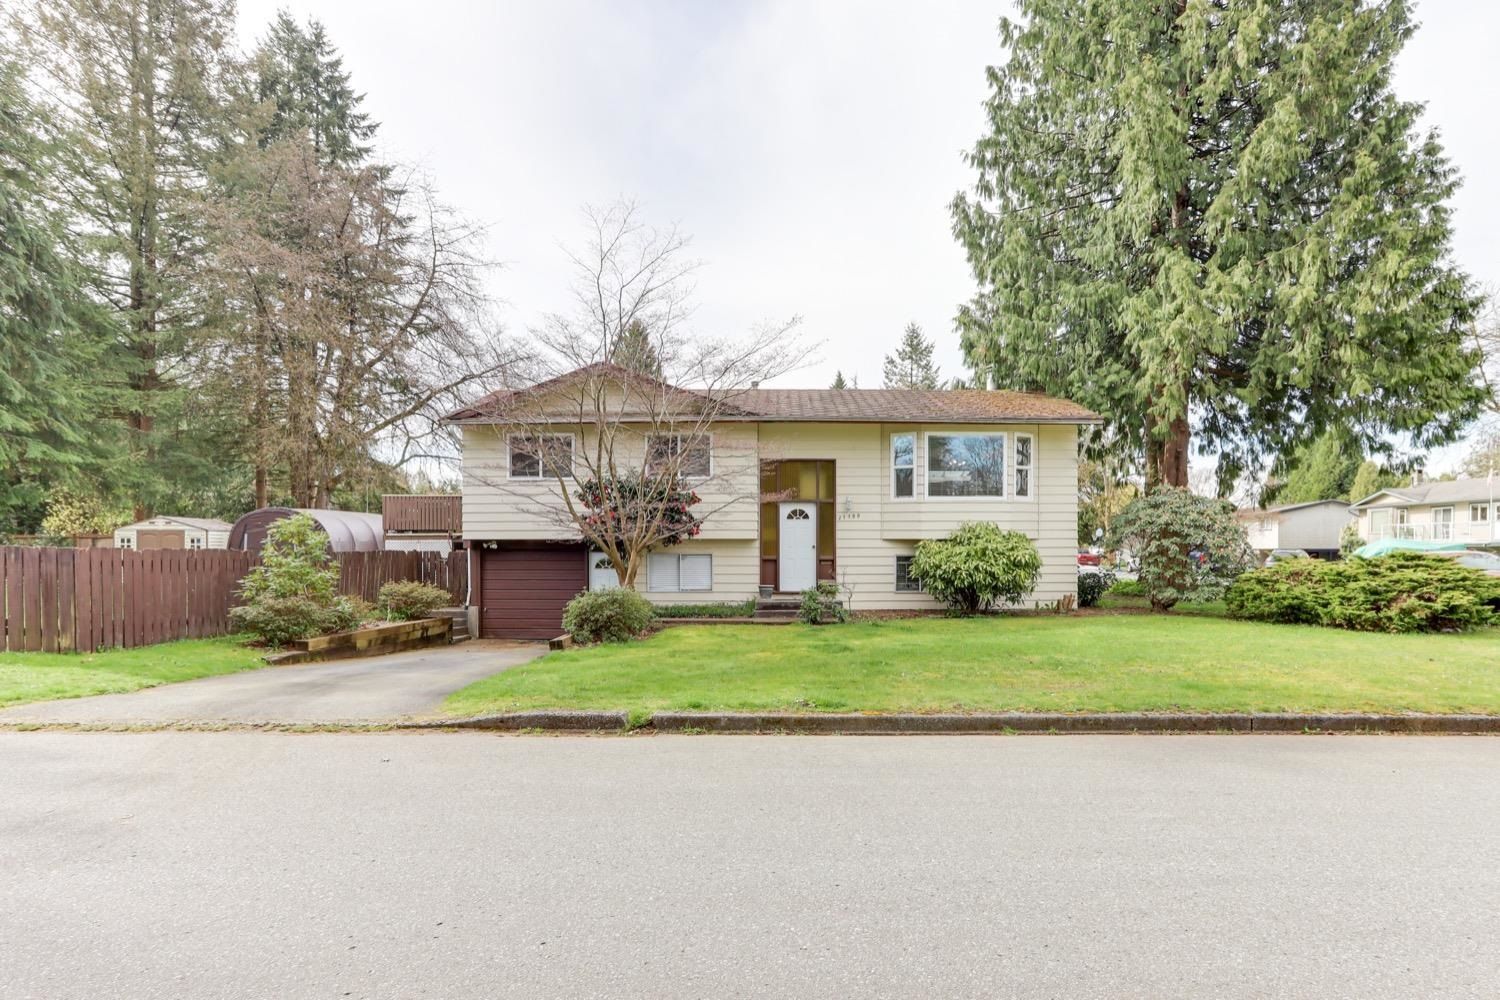 We have just listed a property in Southwest Maple Ridge, Maple Ridge